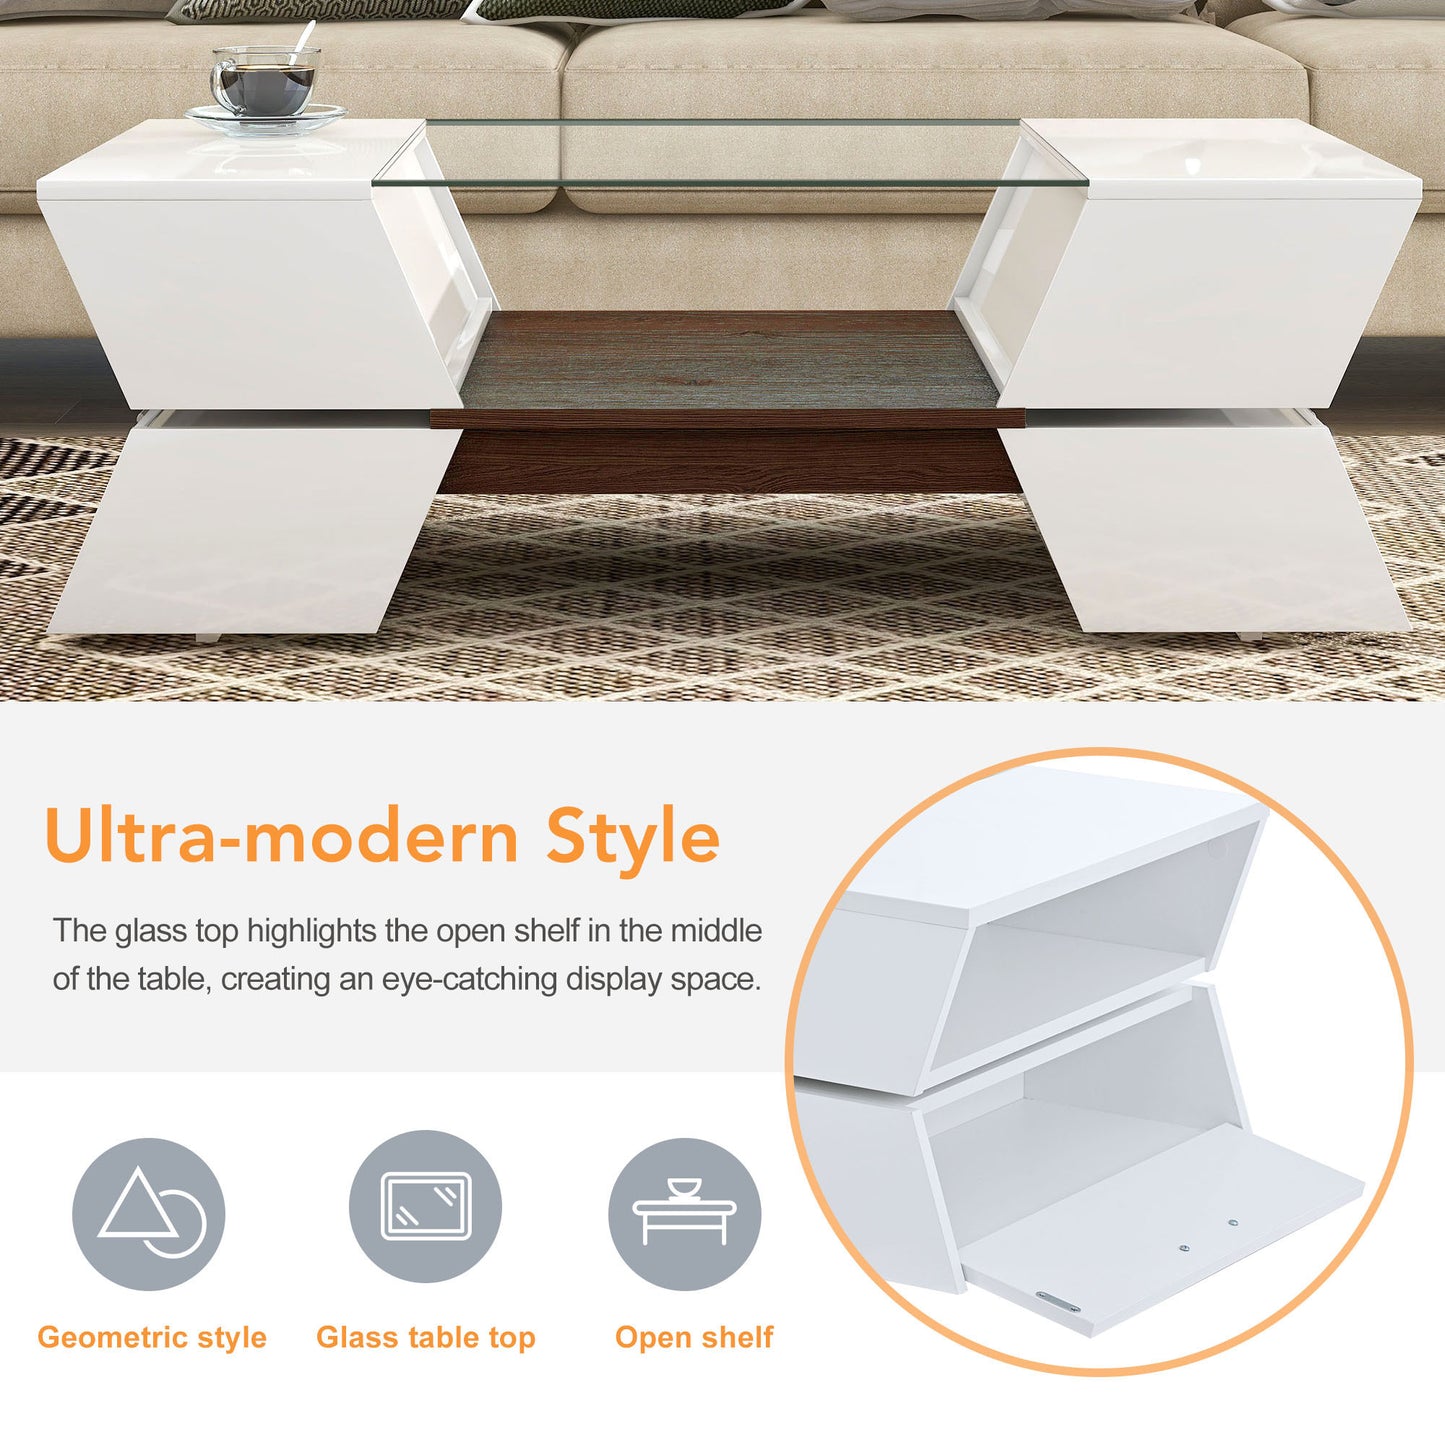 ON-TREND 6mm Glass-Top Coffee Table with Open Shelves and Cabinets, Geometric Style Cocktail Table with Great Storage Capacity, Modernist 2-Tier Center Table for Living Room, White - Enova Luxe Home Store